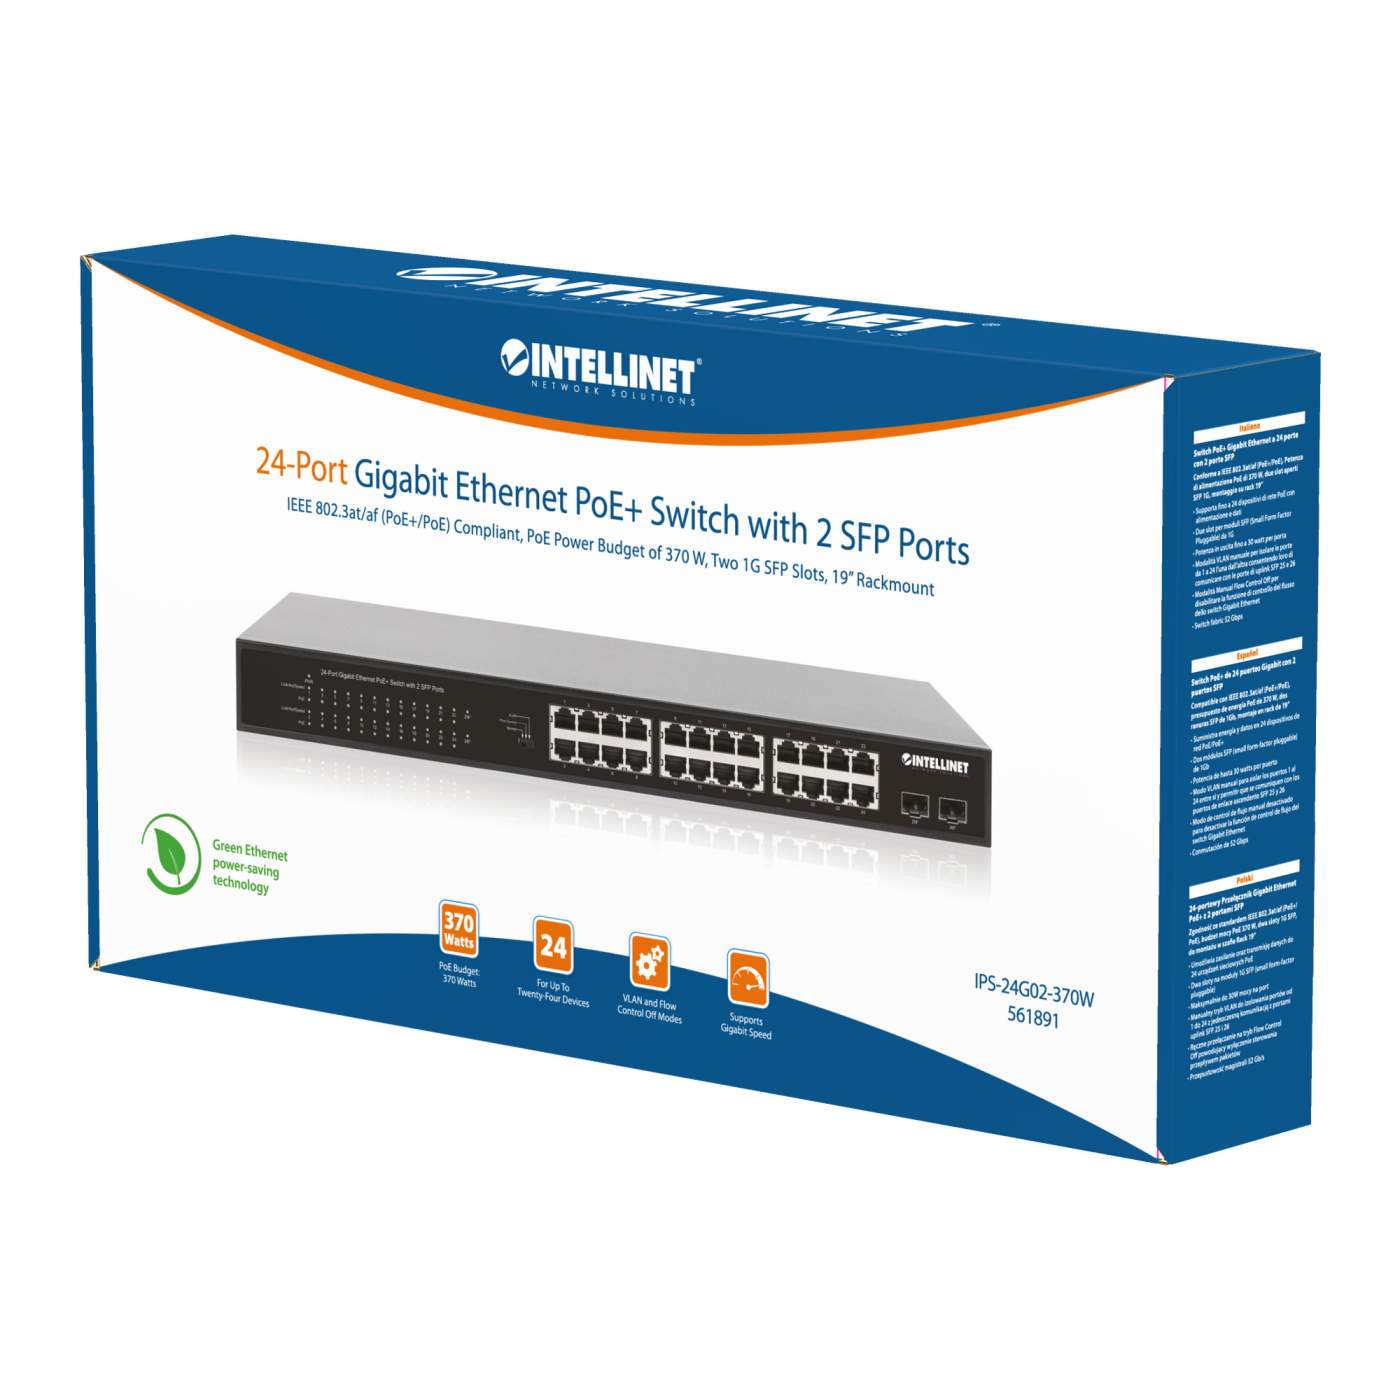 EDIMAX - Switches - Unmanaged - 24-Port Gigabit with 2 SFP Slot Rack-Mount  Switch